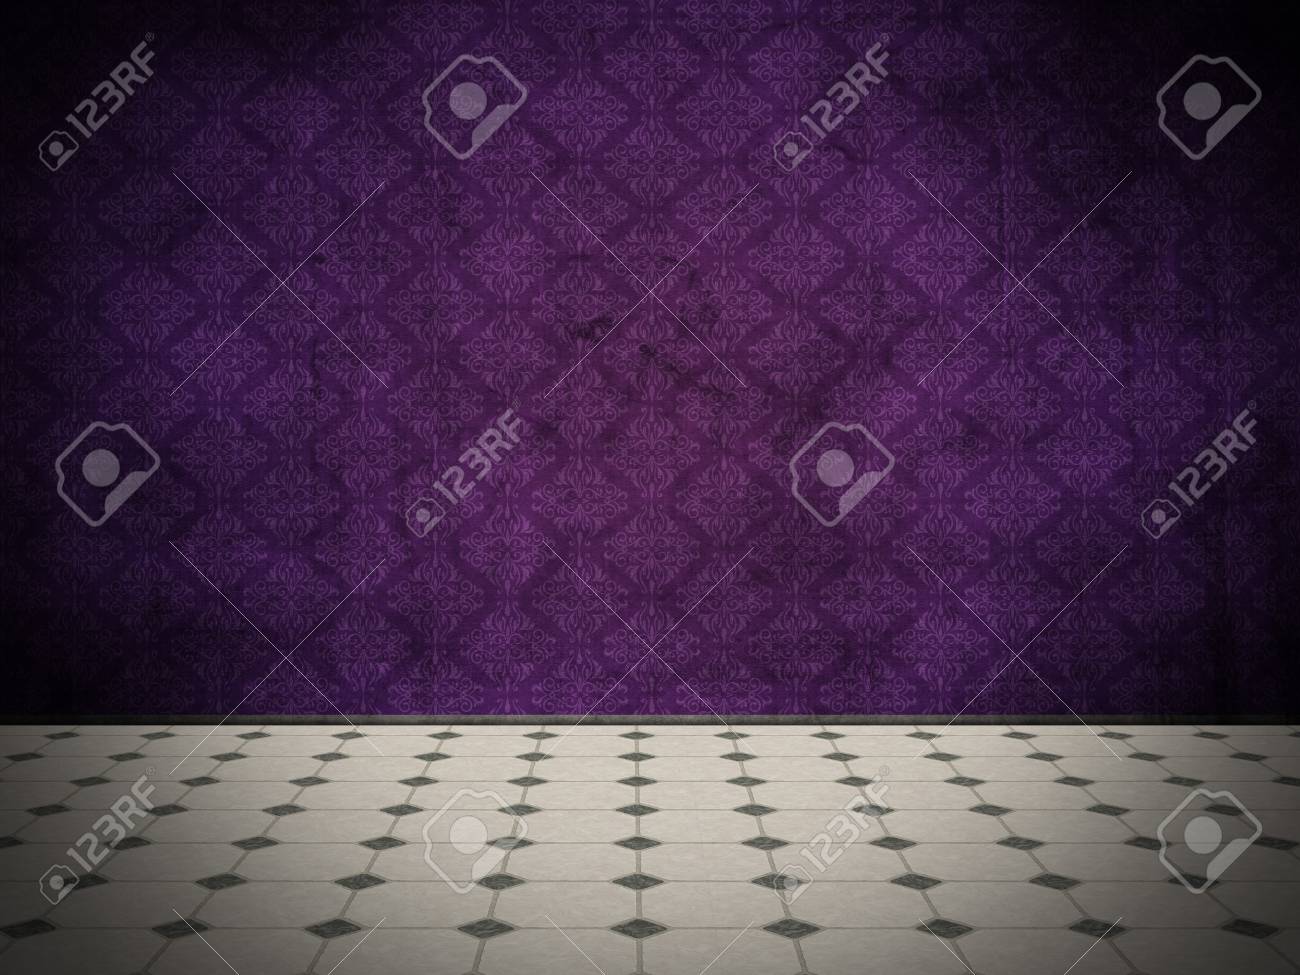 3d Render Of A Grunge Style Interior With Purple Damask Wallpaper